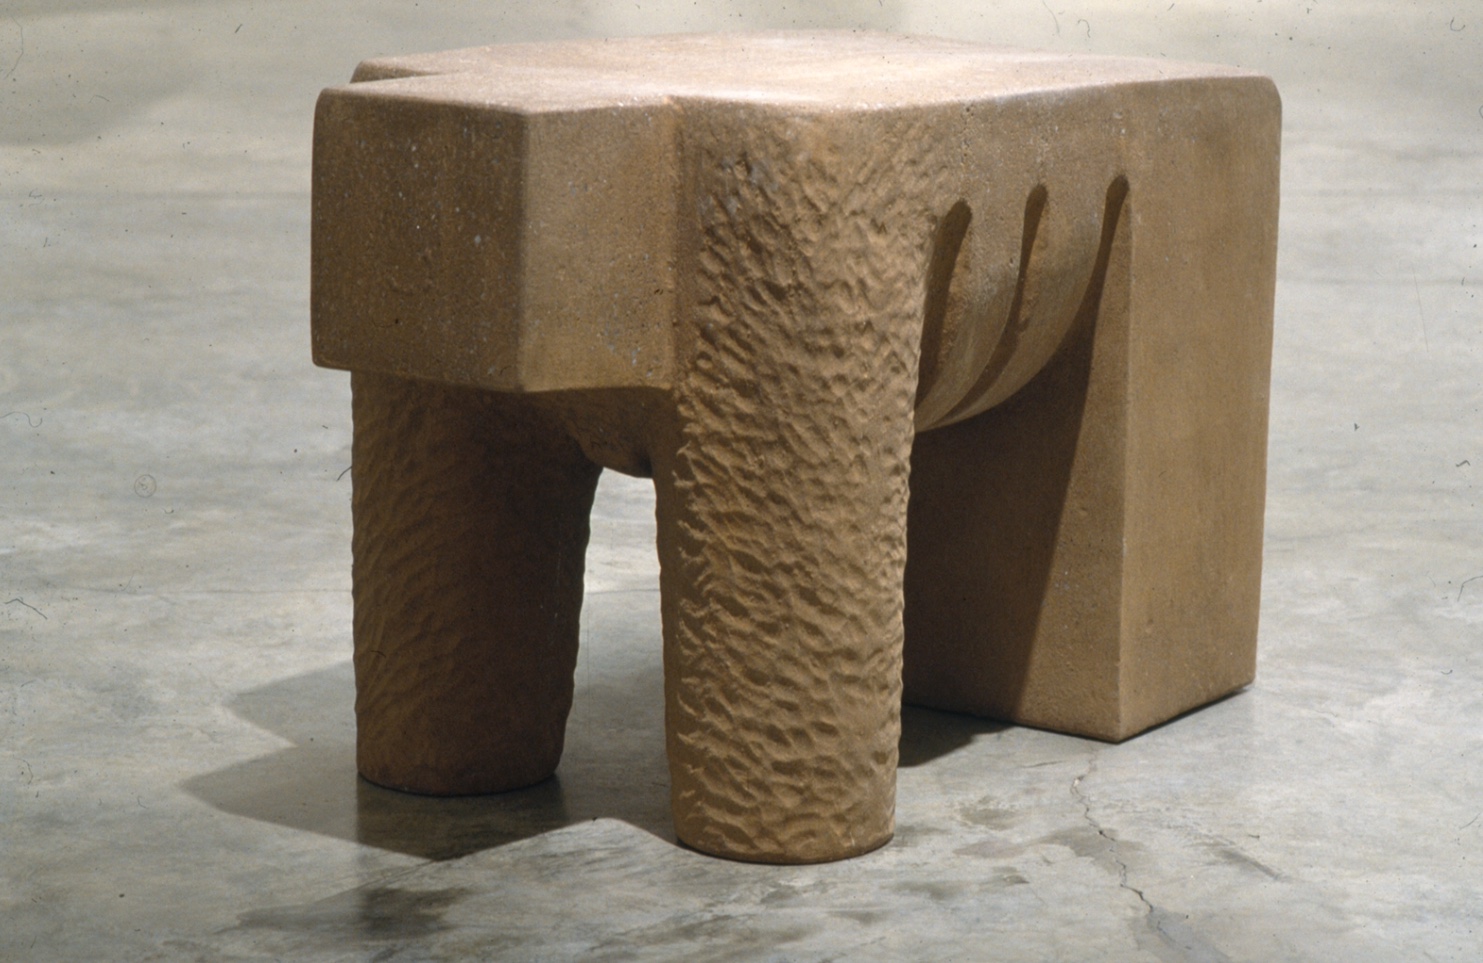 A concrete elephant shaped table with two legs.